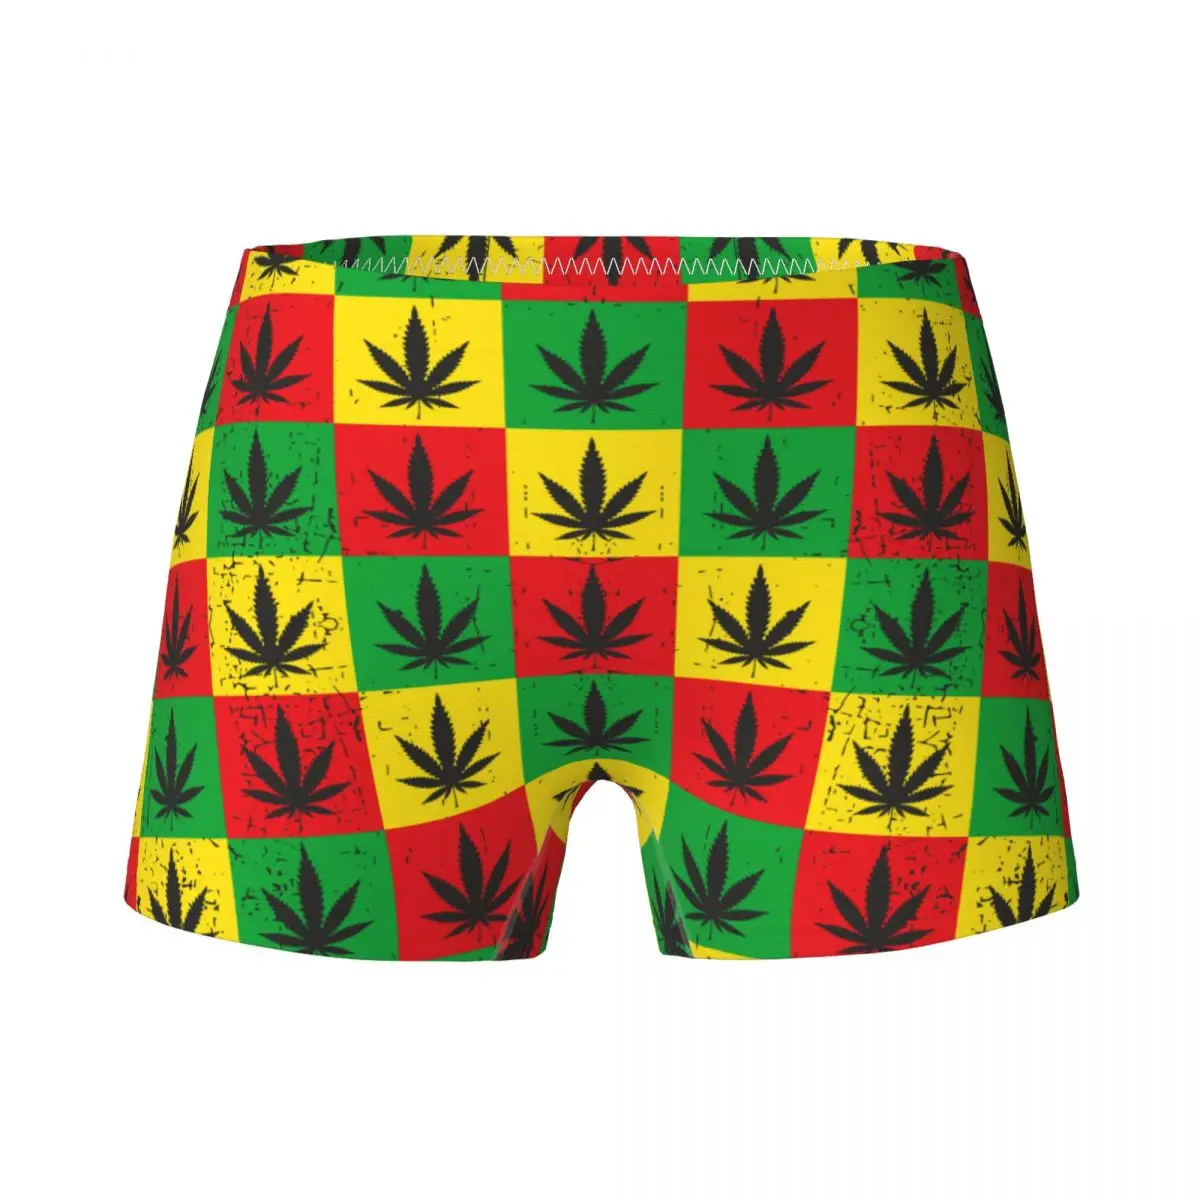 

Cannabis Leaf Children's Girls Underwear Kids Pretty Boxers Shorts Soft Cotton Teenagers Panties Leaves Floral Underpants 4-15Y